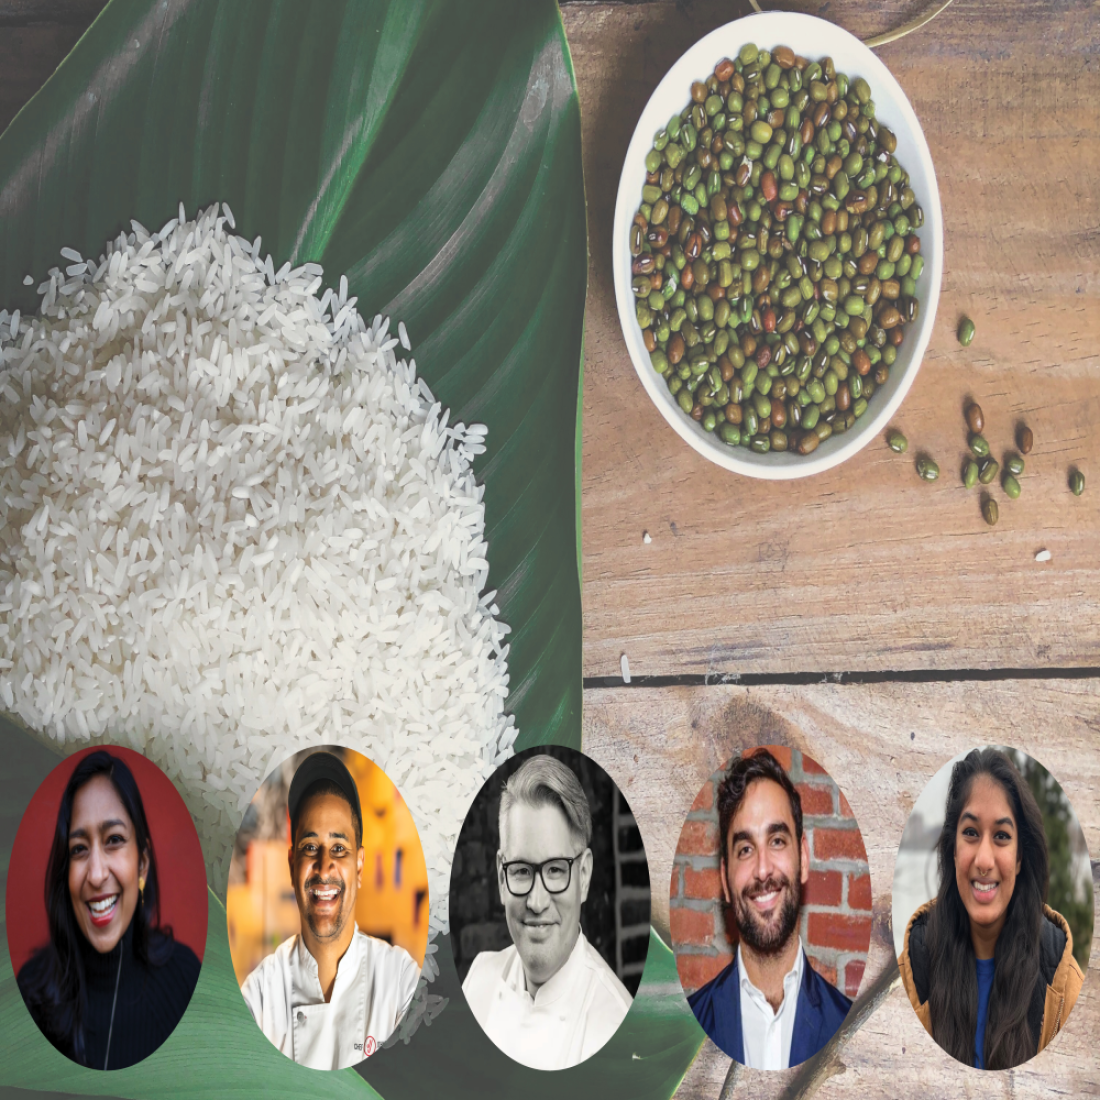 A pile of uncooked white rice on top of a green leaf. To the right is a bowl of uncooked beans. On the lower right corner is a headshot of  Priya Krishna, Chef JJ Johnson, Oscar Lorenzzi, and  James Gonzalez Anisha Rathod